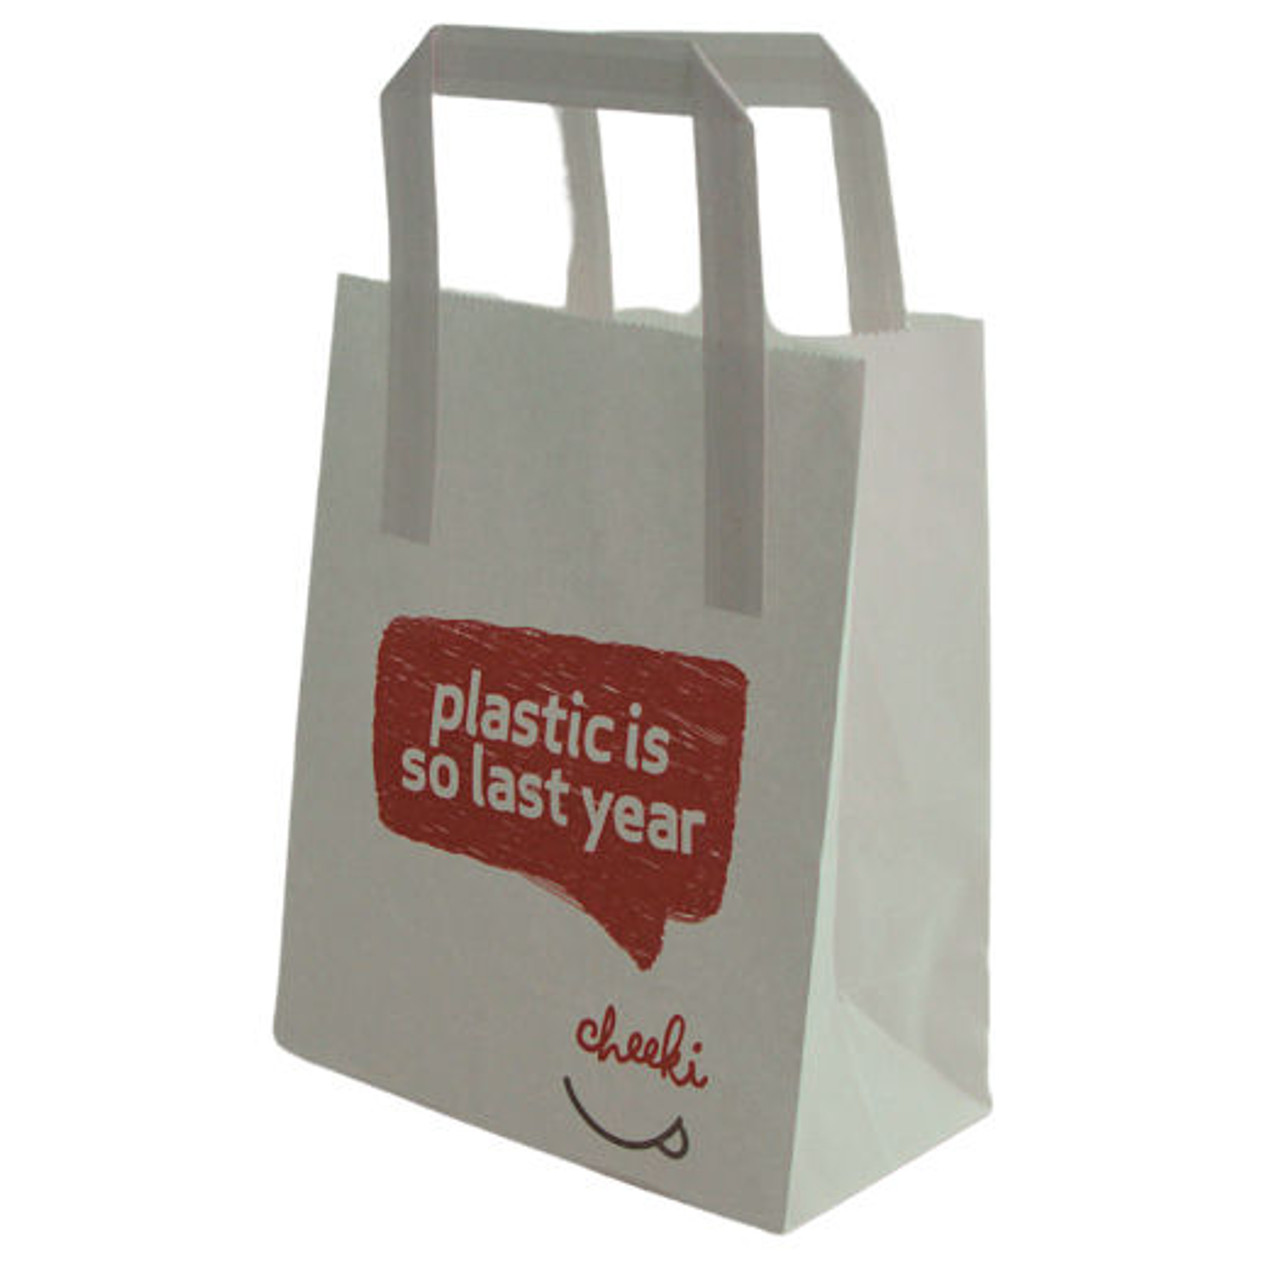 White Paper Takeaway Carrier Bag Small 7''x10'' x 8 1/2'' Pack of 50 Printed 'Plastic is so last year'